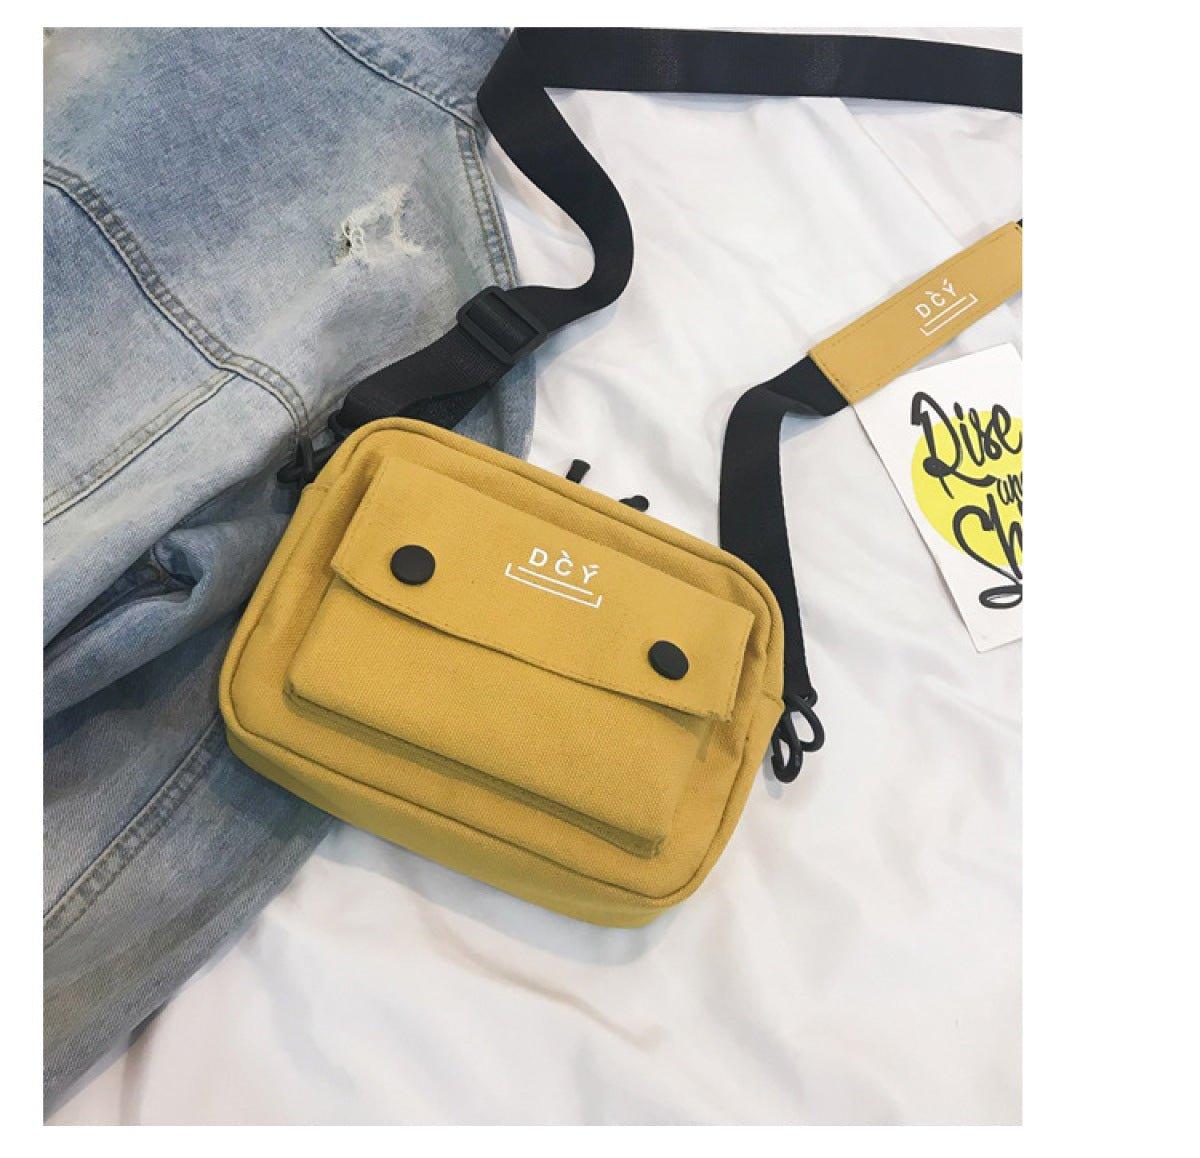 Daily Use Casual Messenger Bag